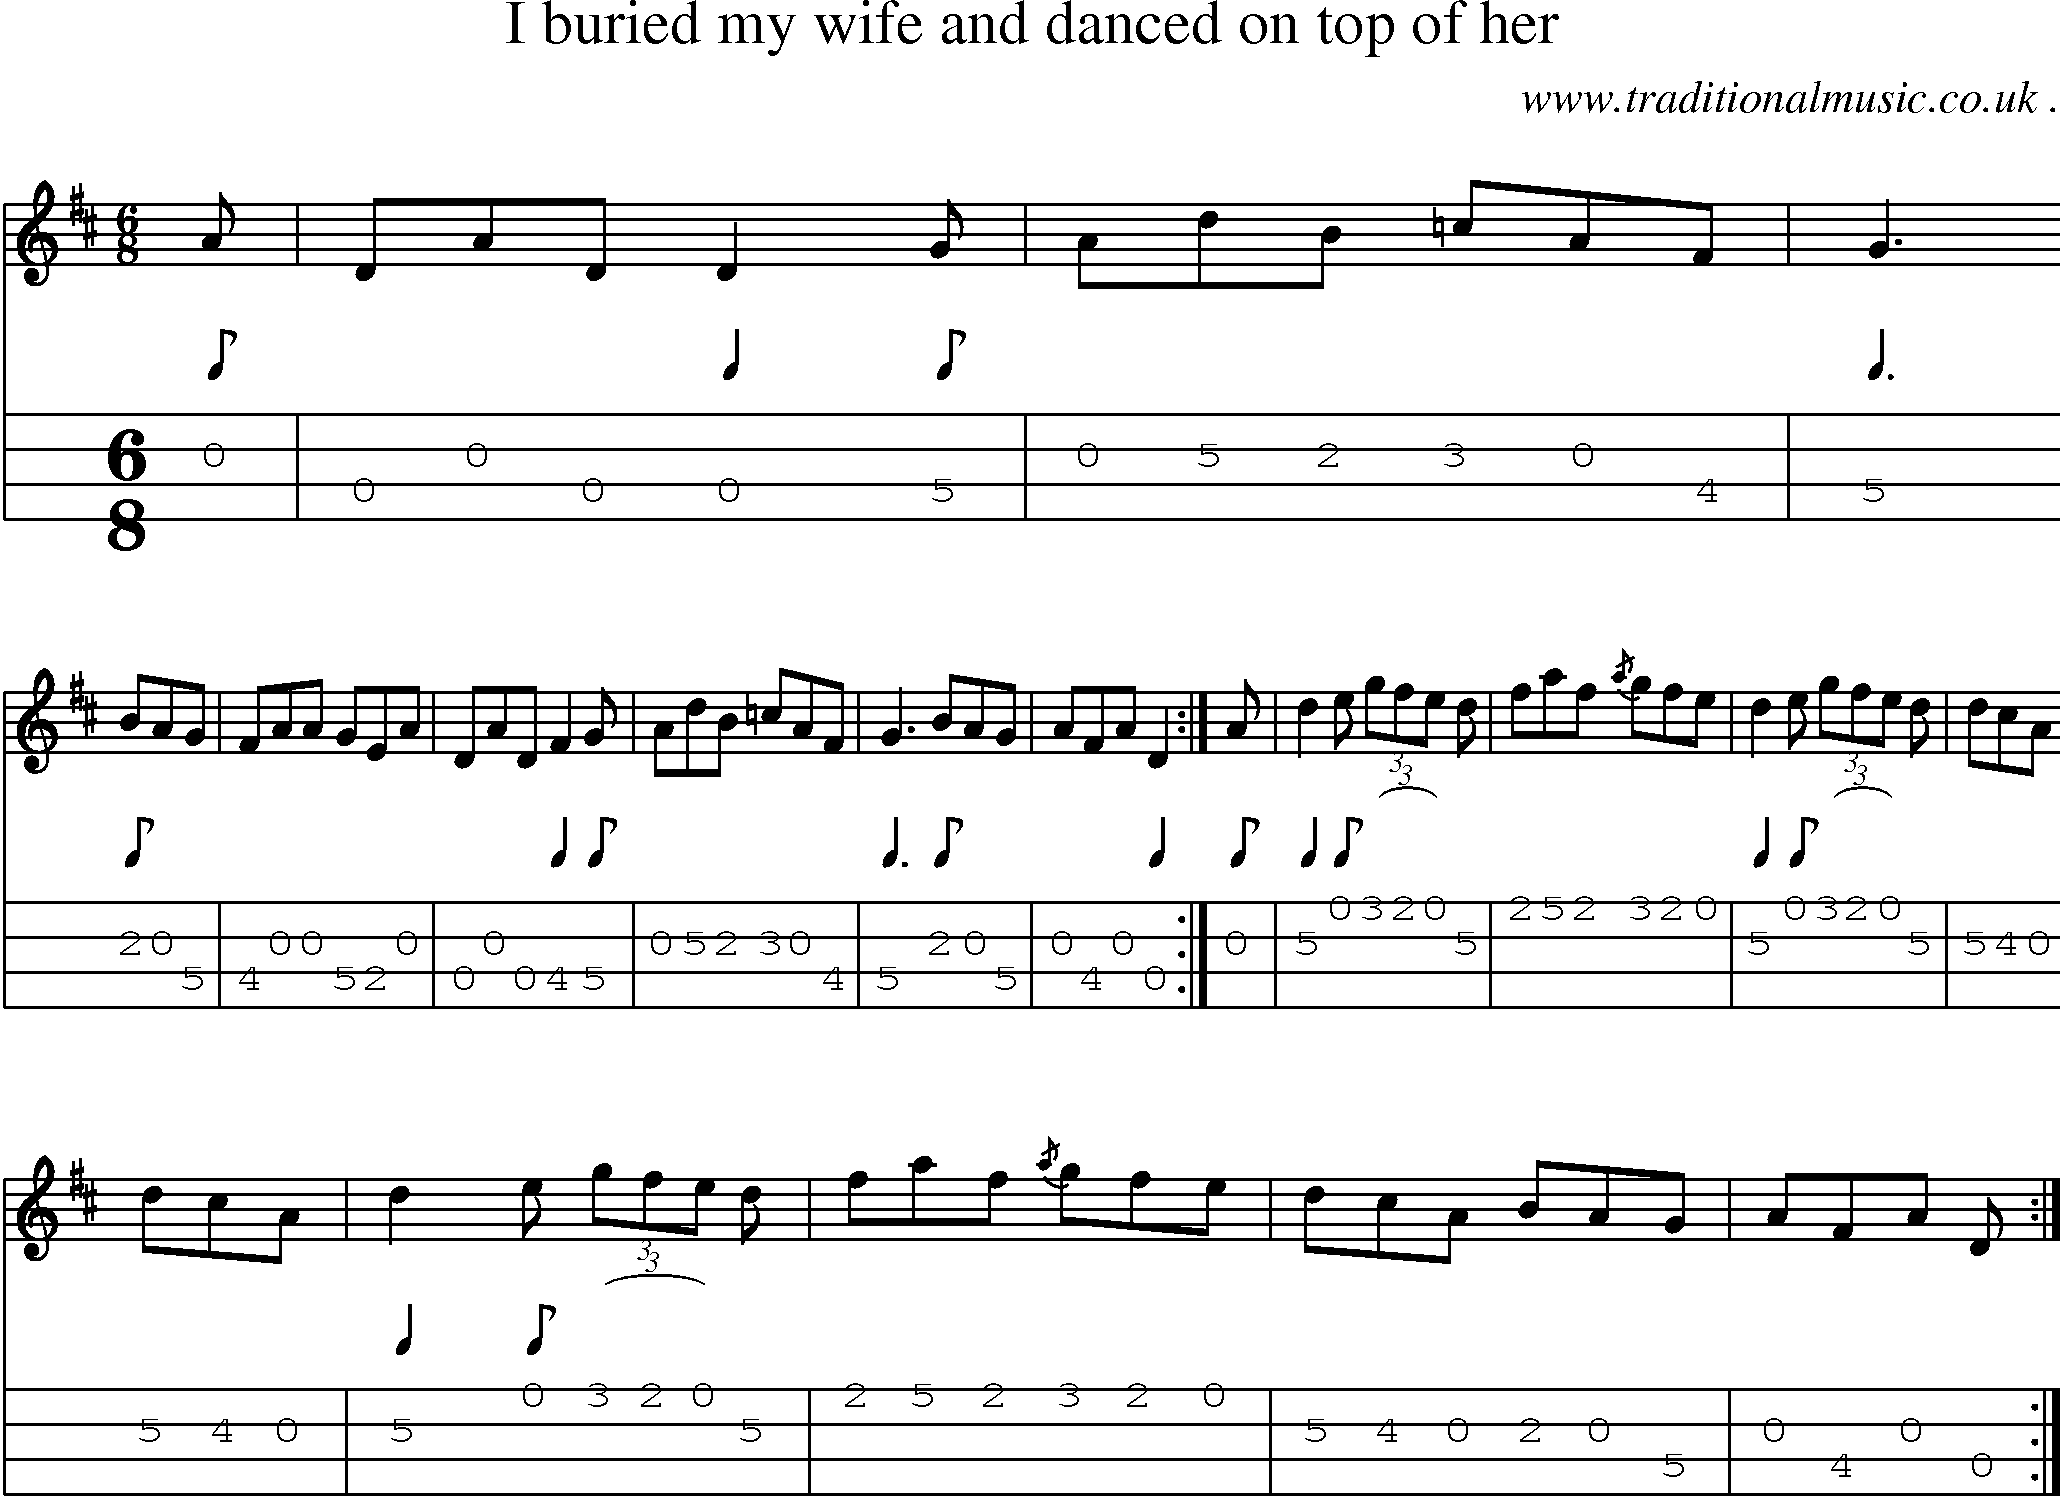 Sheet-music  score, Chords and Mandolin Tabs for I Buried My Wife And Danced On Top Of Her